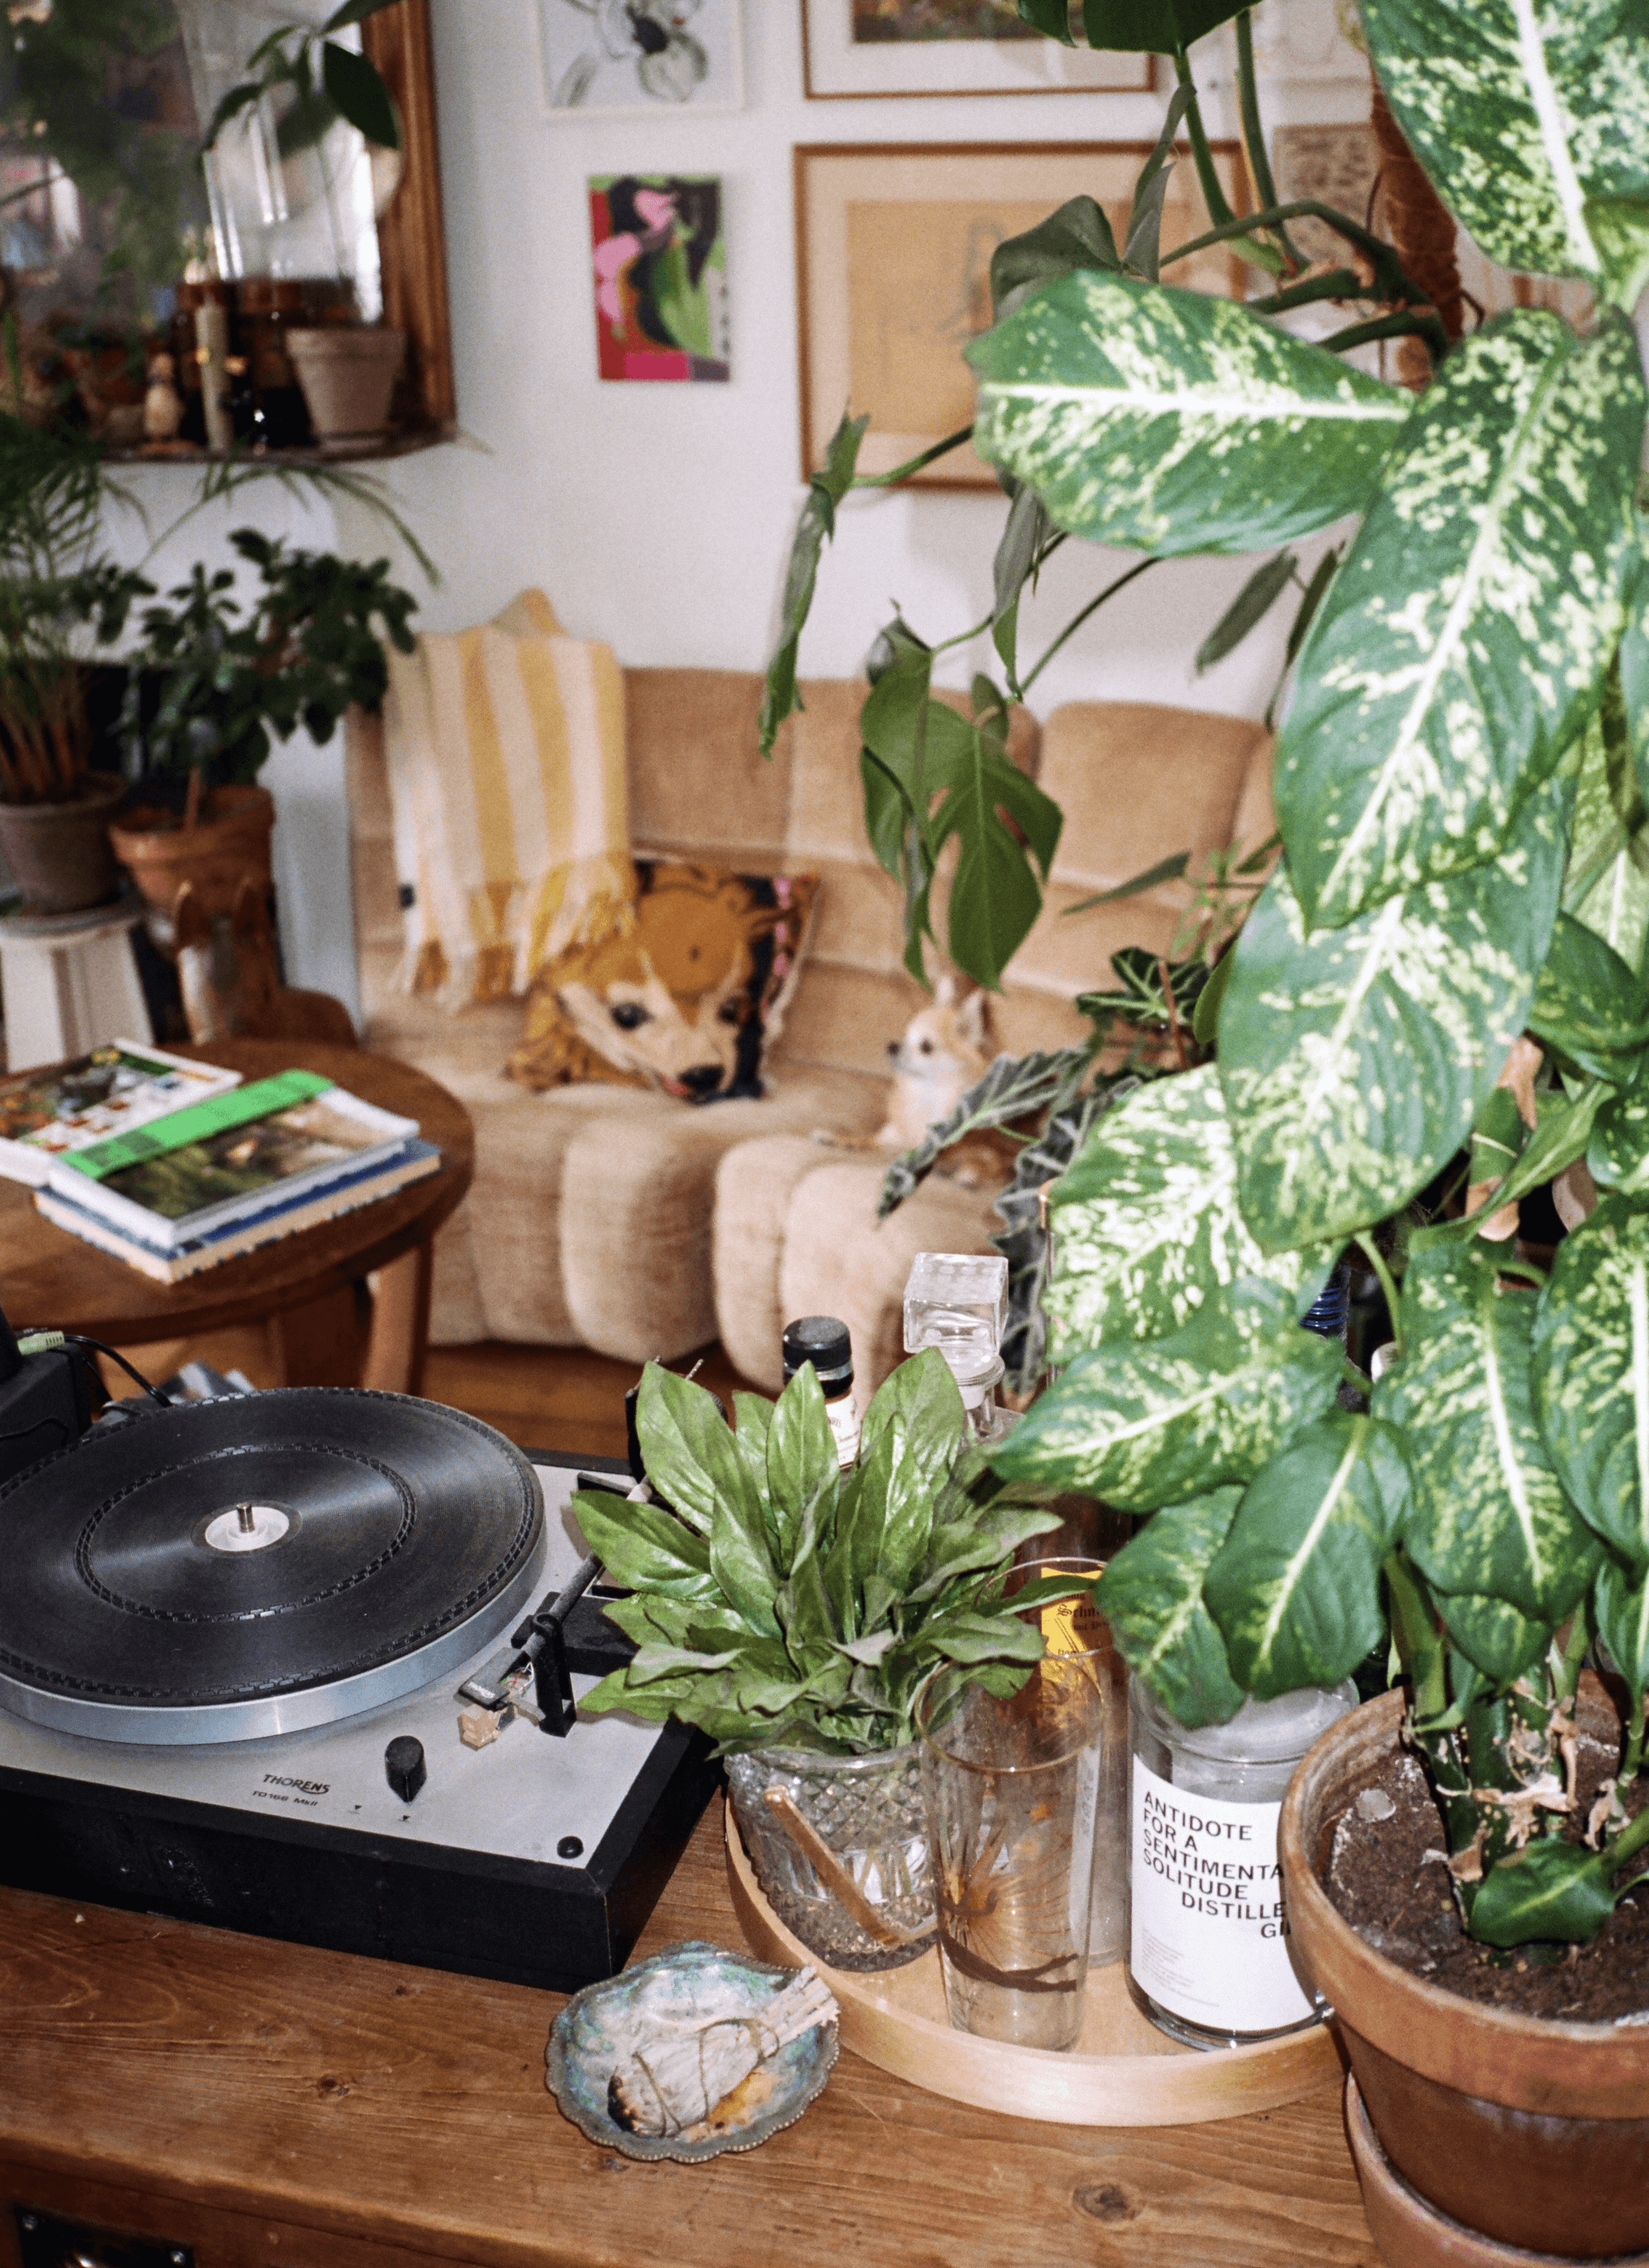 A big pot of Dumb cane next to a small pot of basils next to a phonograph on the table. Behind these, a small dog is sitting on the sofa with cushions and a couple of books on the table.